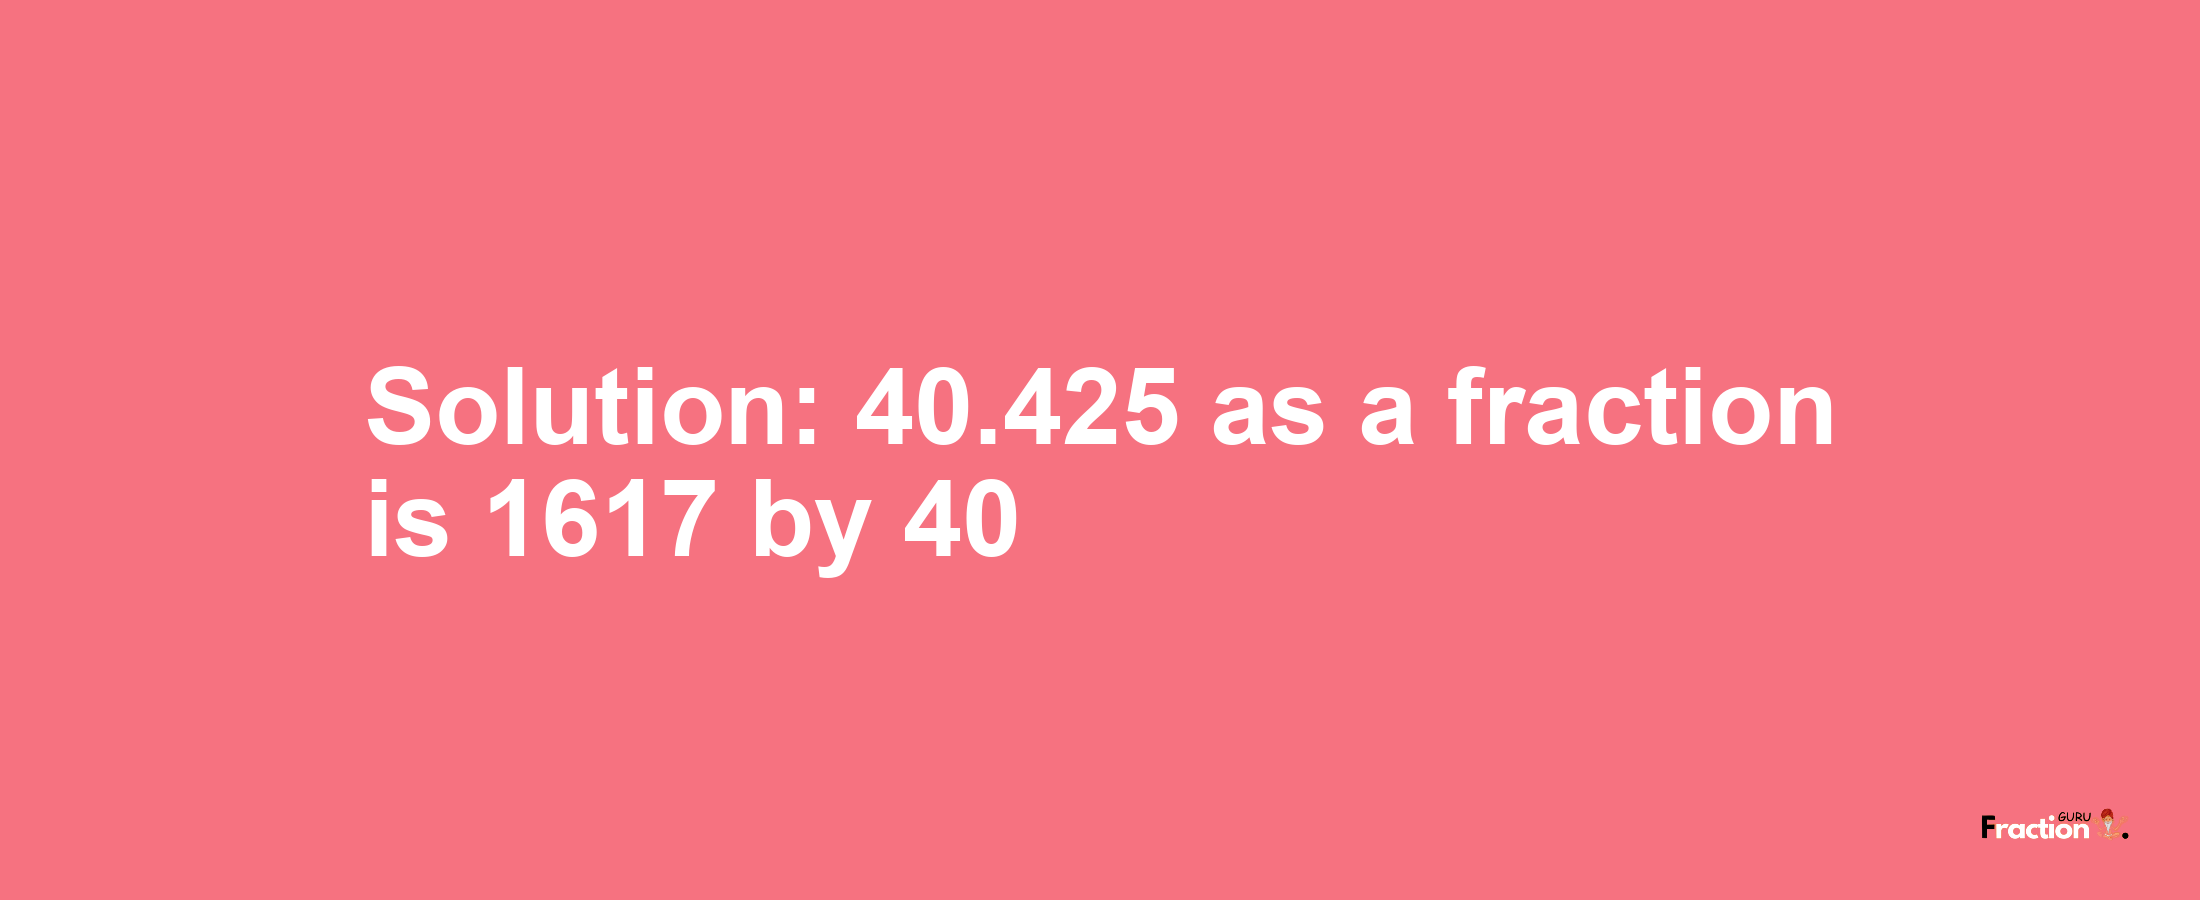 Solution:40.425 as a fraction is 1617/40